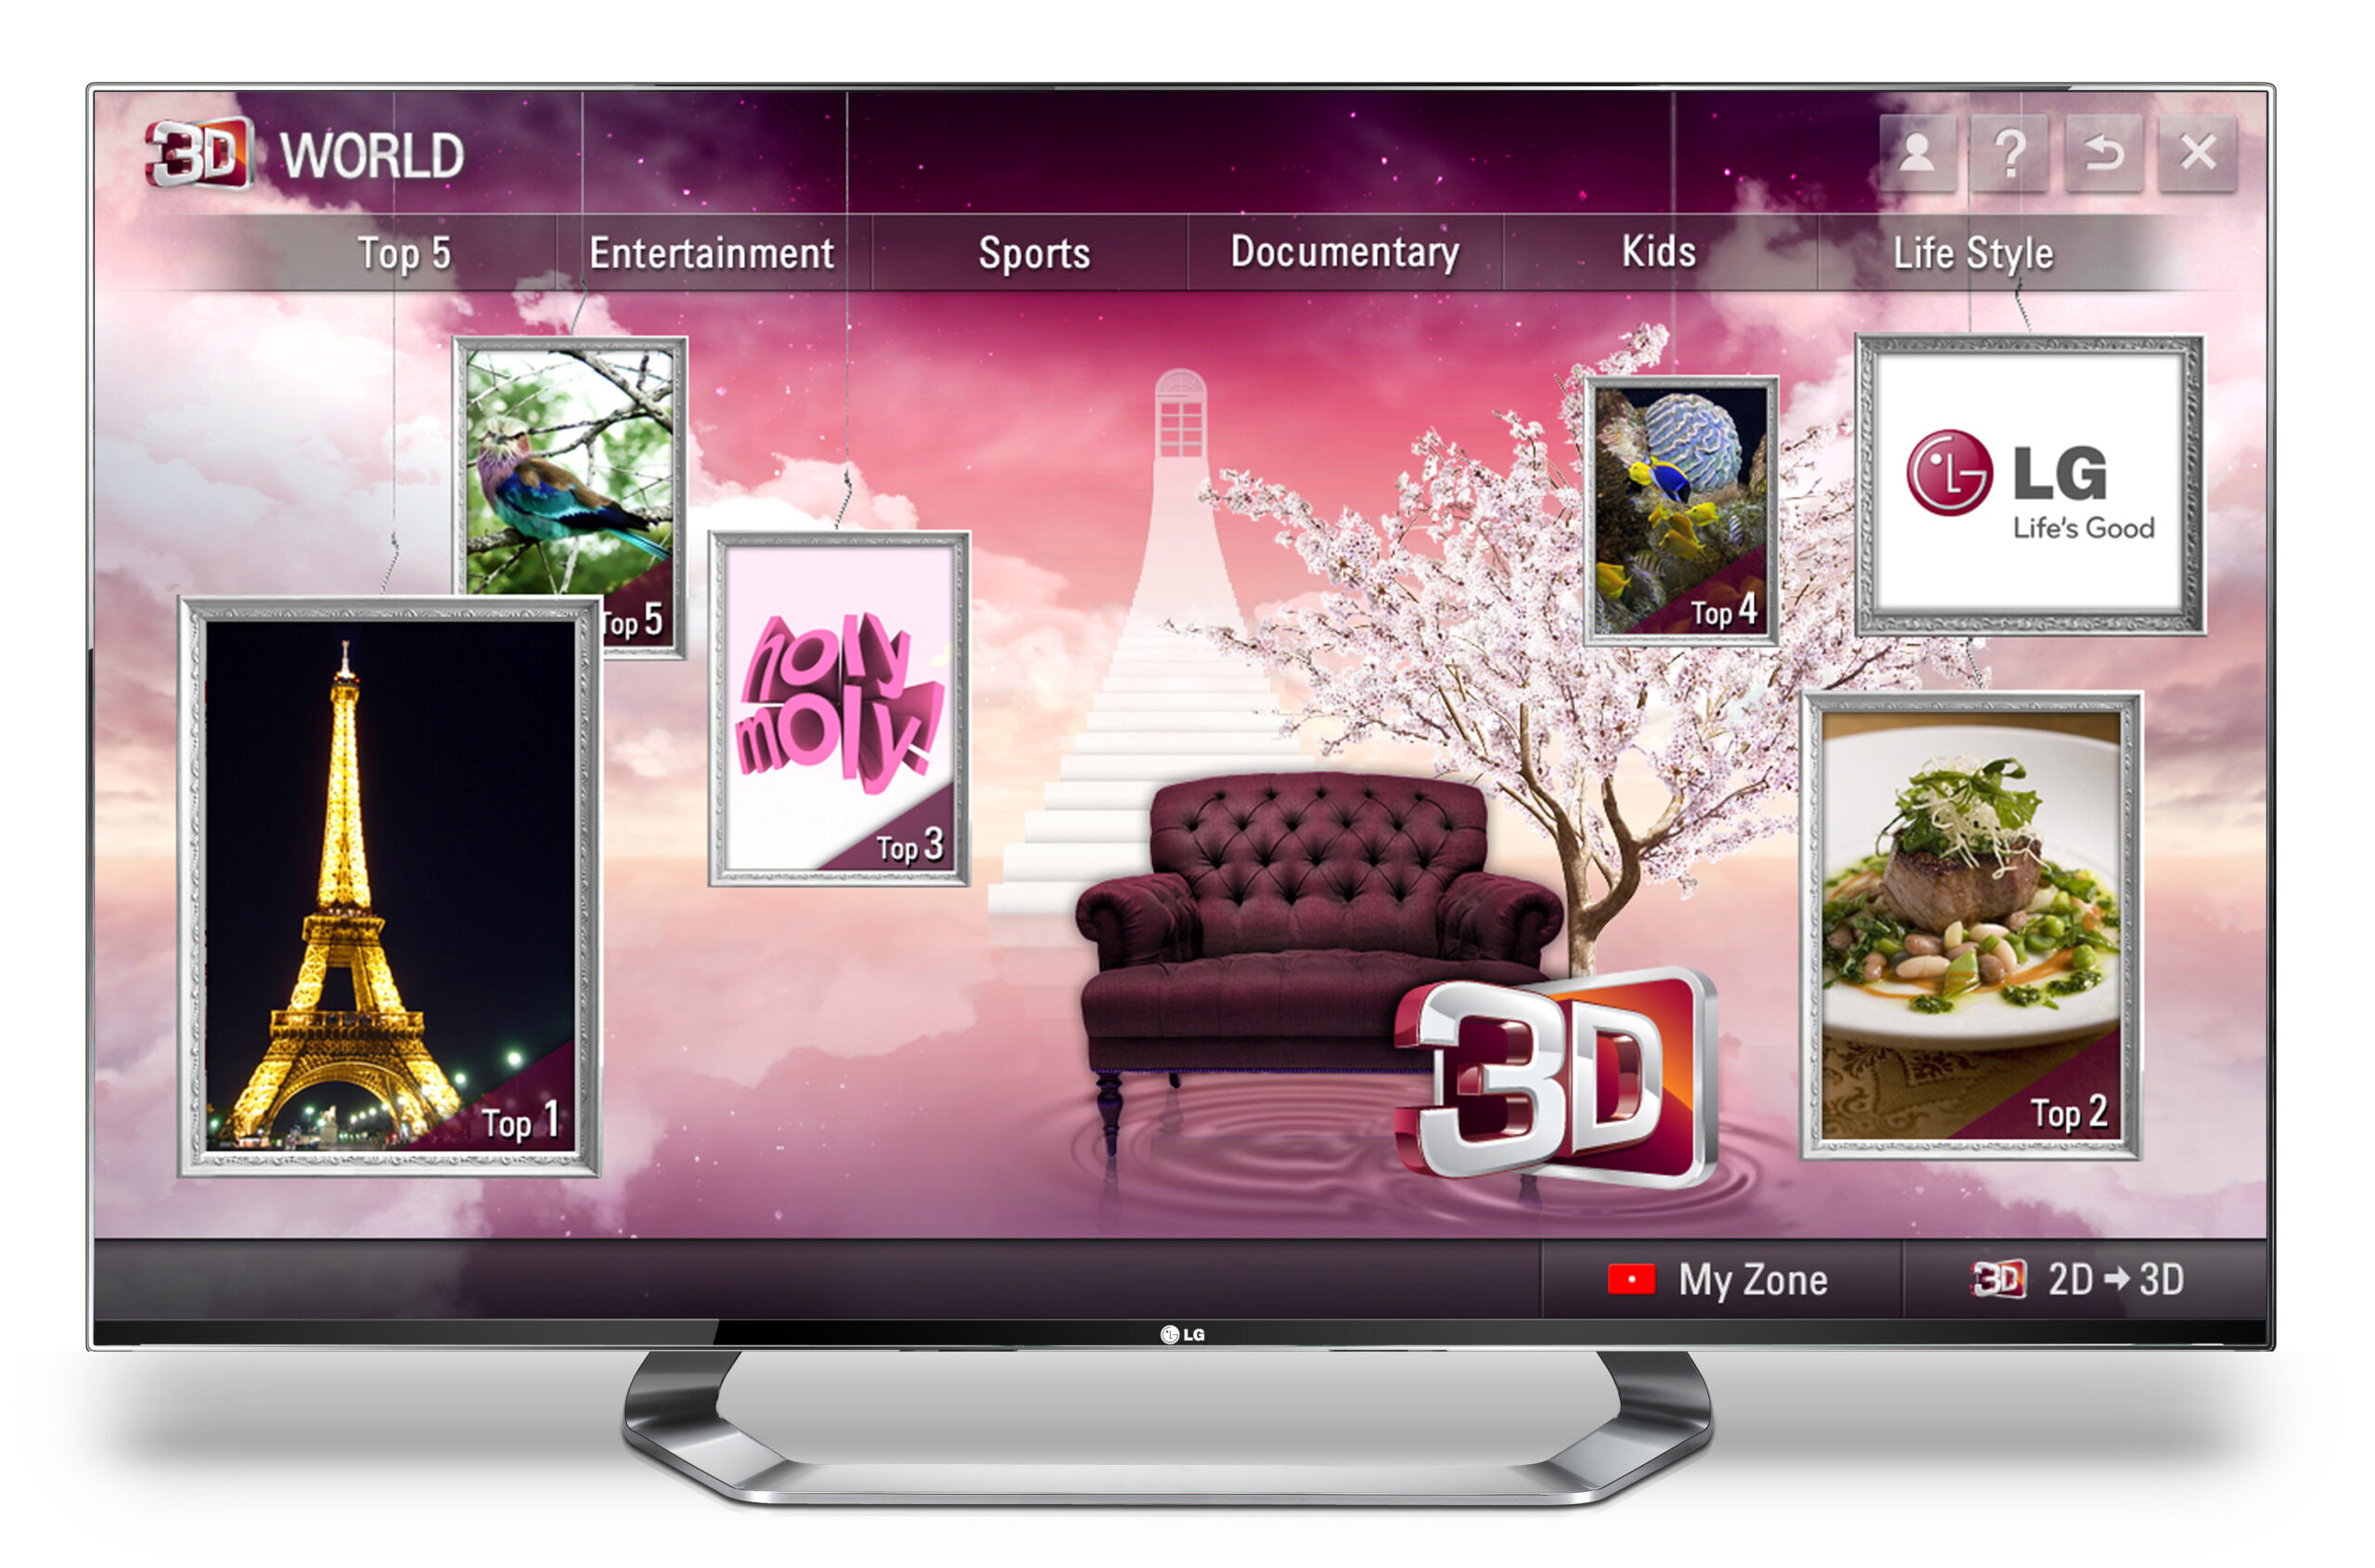 The home page of LG’s premium 3D content service, 3D World, on an LG TV